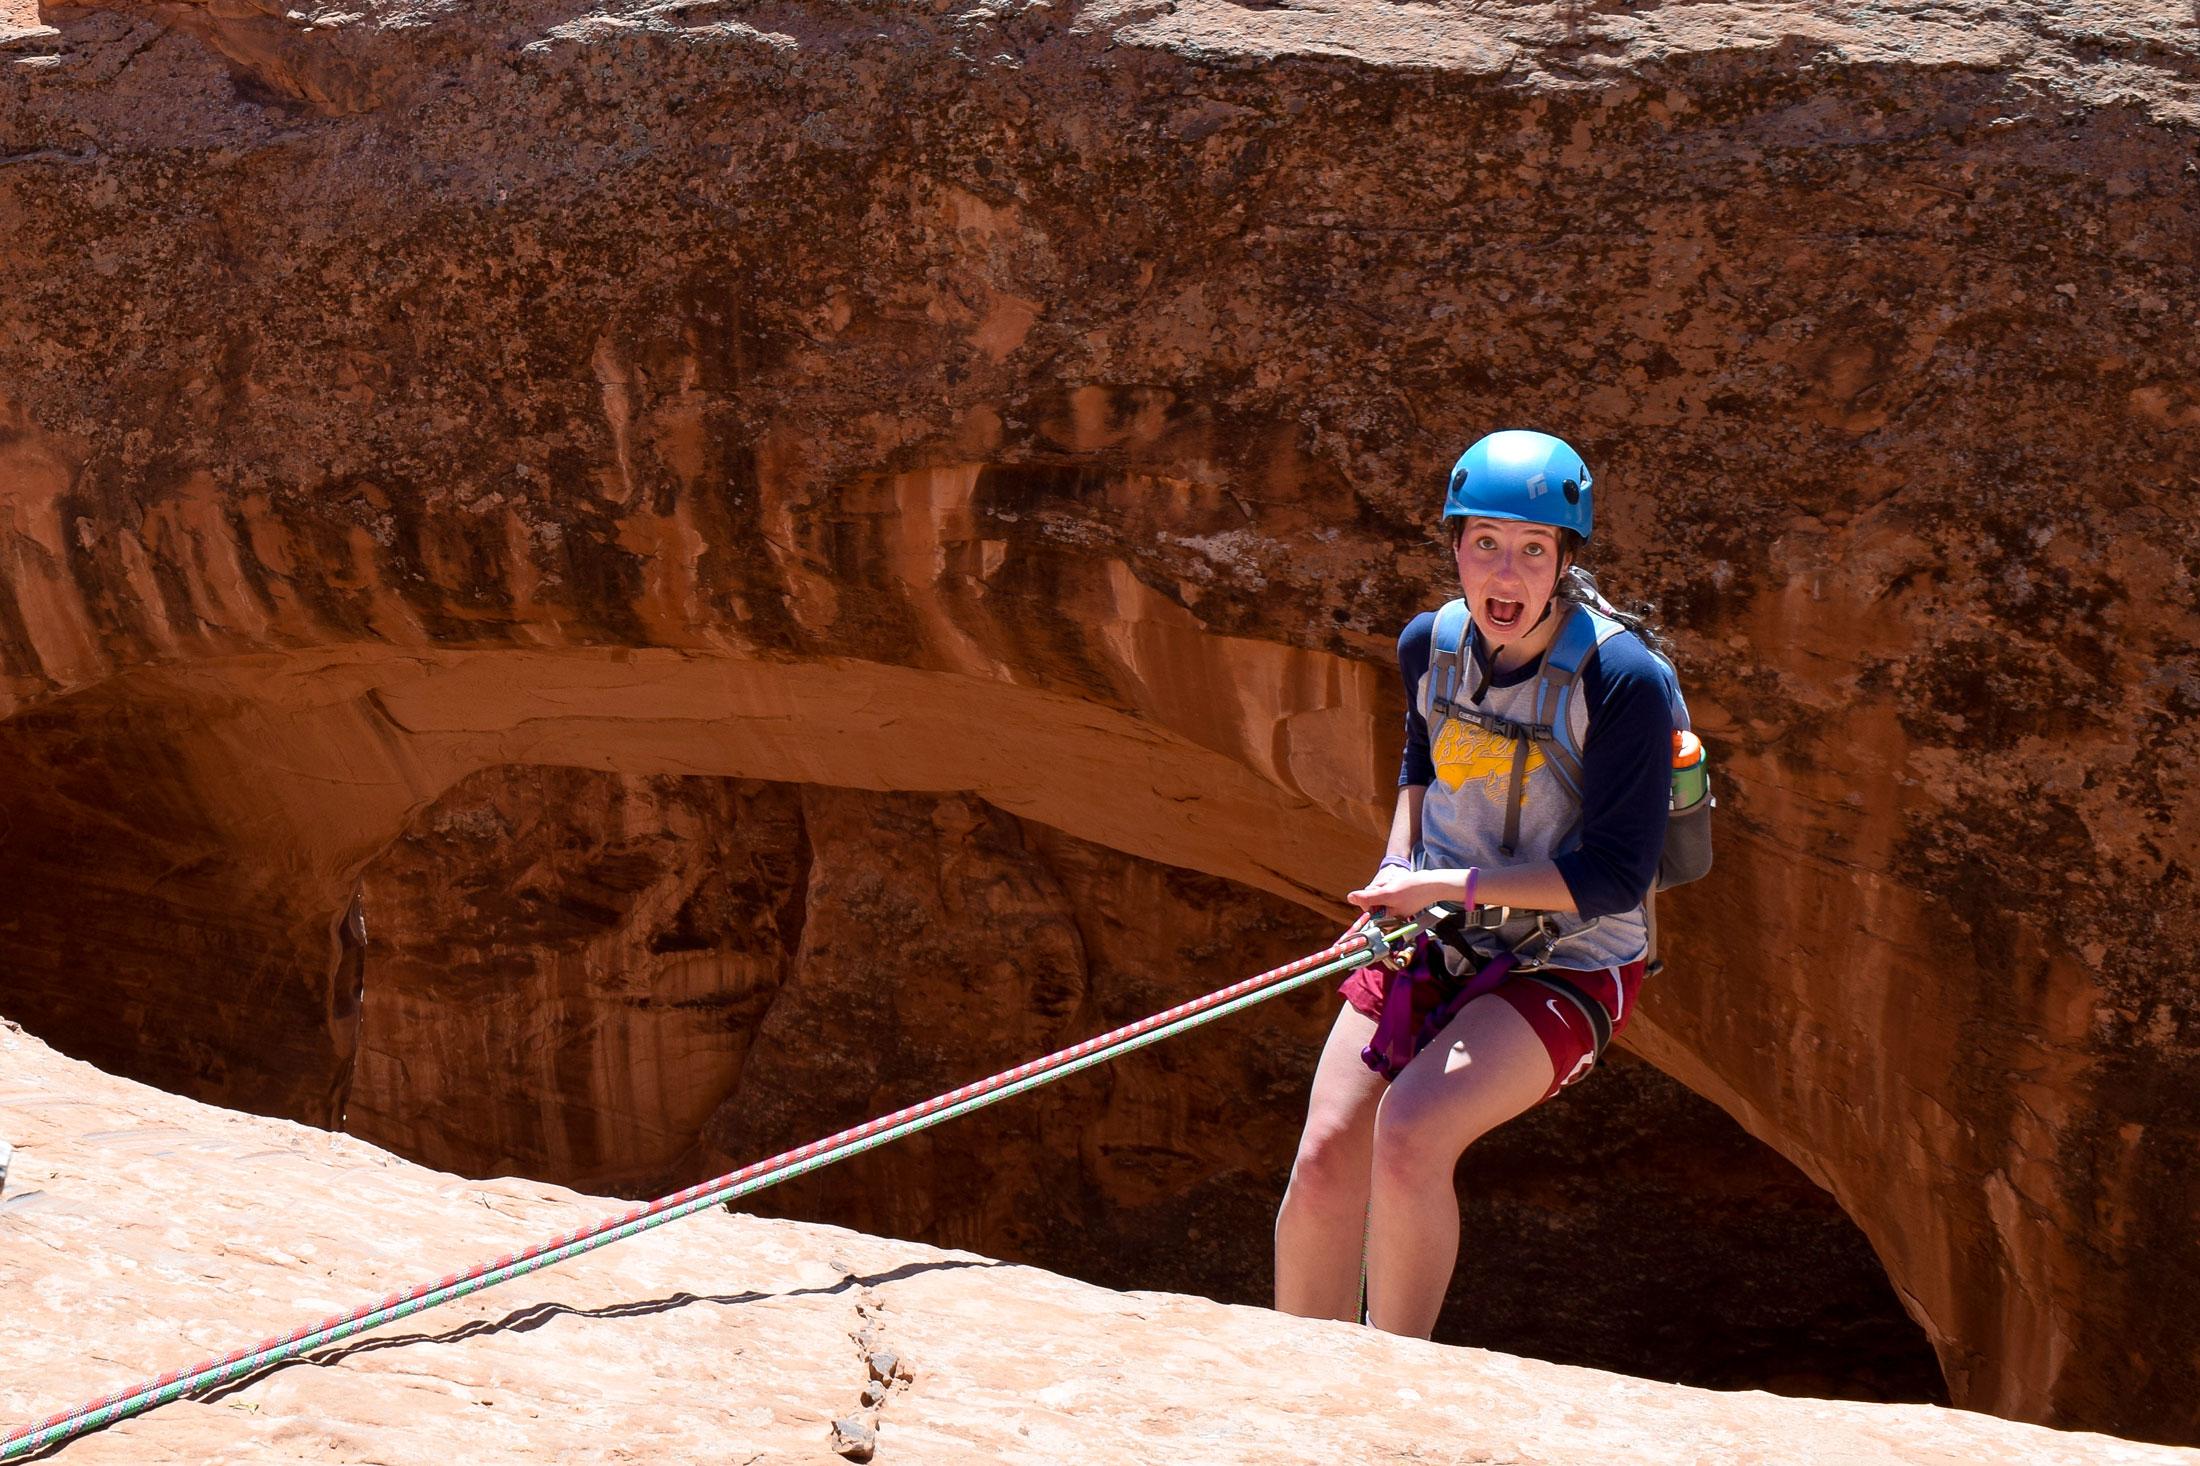 Elle Barta repelling down a large rock in the desert